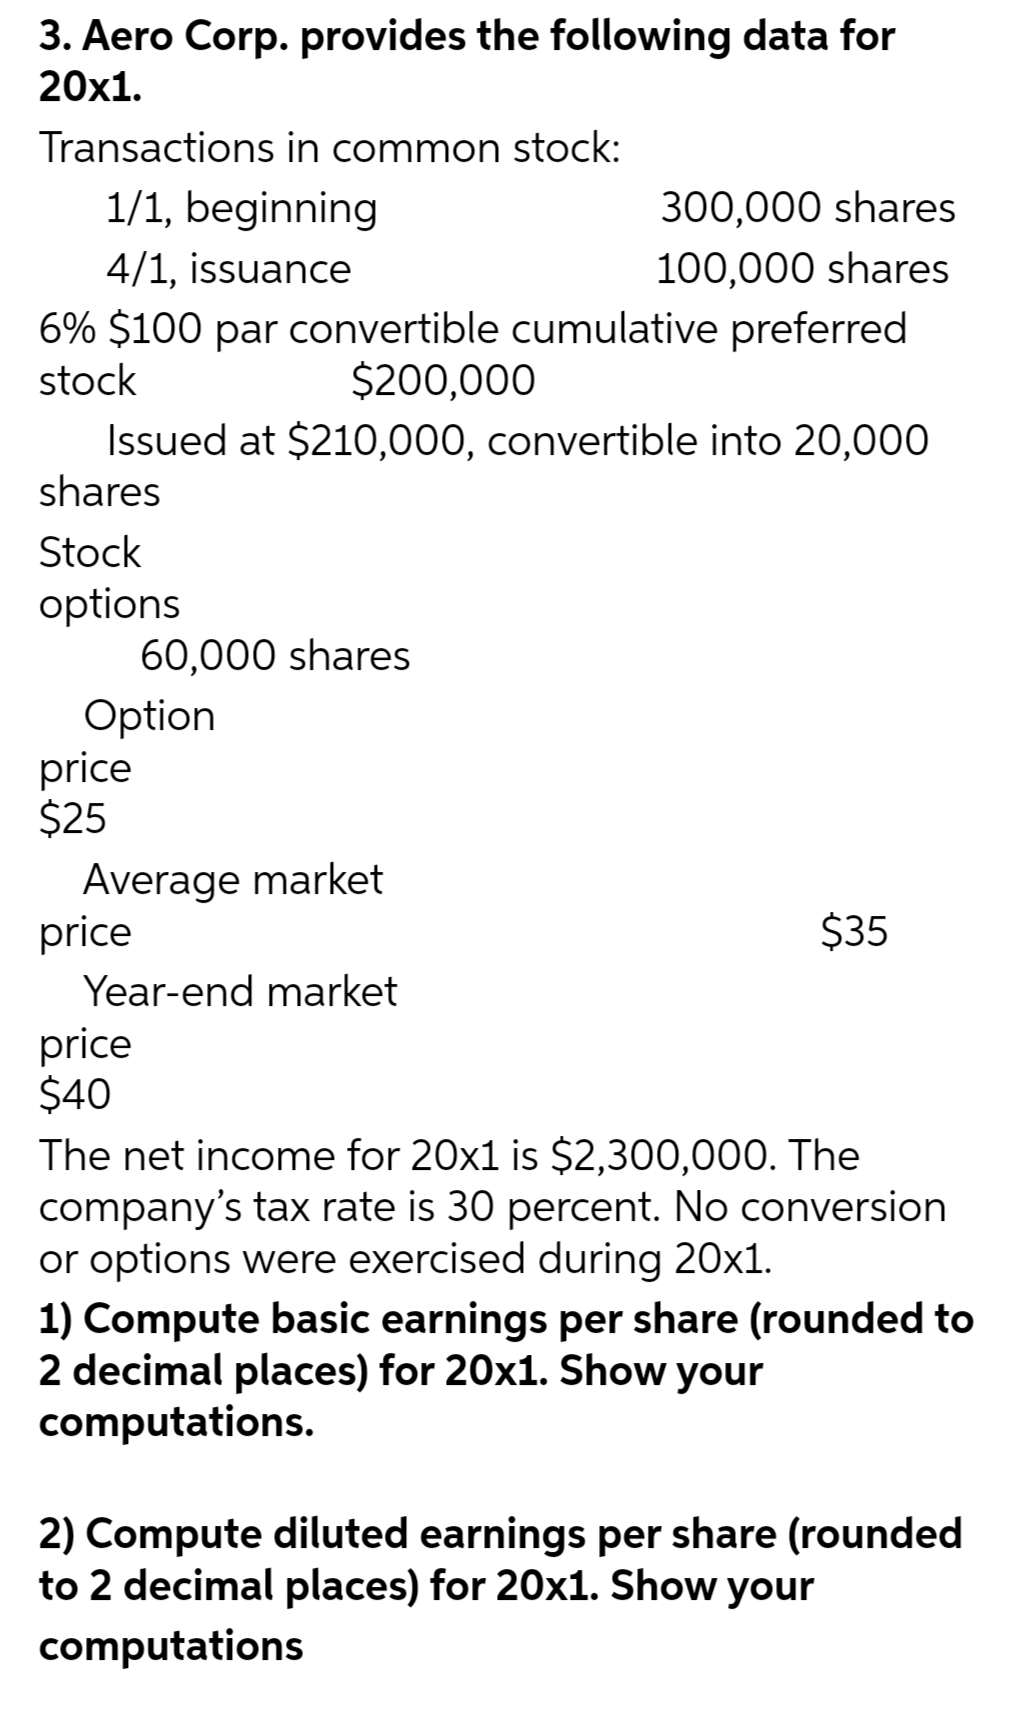 3. Aero Corp. provides the following data for
20x1.
Transactions in common stock:
1/1, beginning
4/1, issuance
6% $100 par convertible cumulative preferred
stock
$200,000
Issued at $210,000, convertible into 20,000
shares
Stock
options
Option
price
$25
60,000 shares
Average market
price
Year-end market
price
$40
300,000 shares
100,000 shares
$35
The net income for 20x1 is $2,300,000. The
company's tax rate is 30 percent. No conversion
or options were exercised during 20x1.
1) Compute basic earnings per share (rounded to
2 decimal places) for 20x1. Show your
computations.
2) Compute diluted earnings per share (rounded
to 2 decimal places) for 20x1. Show your
computations